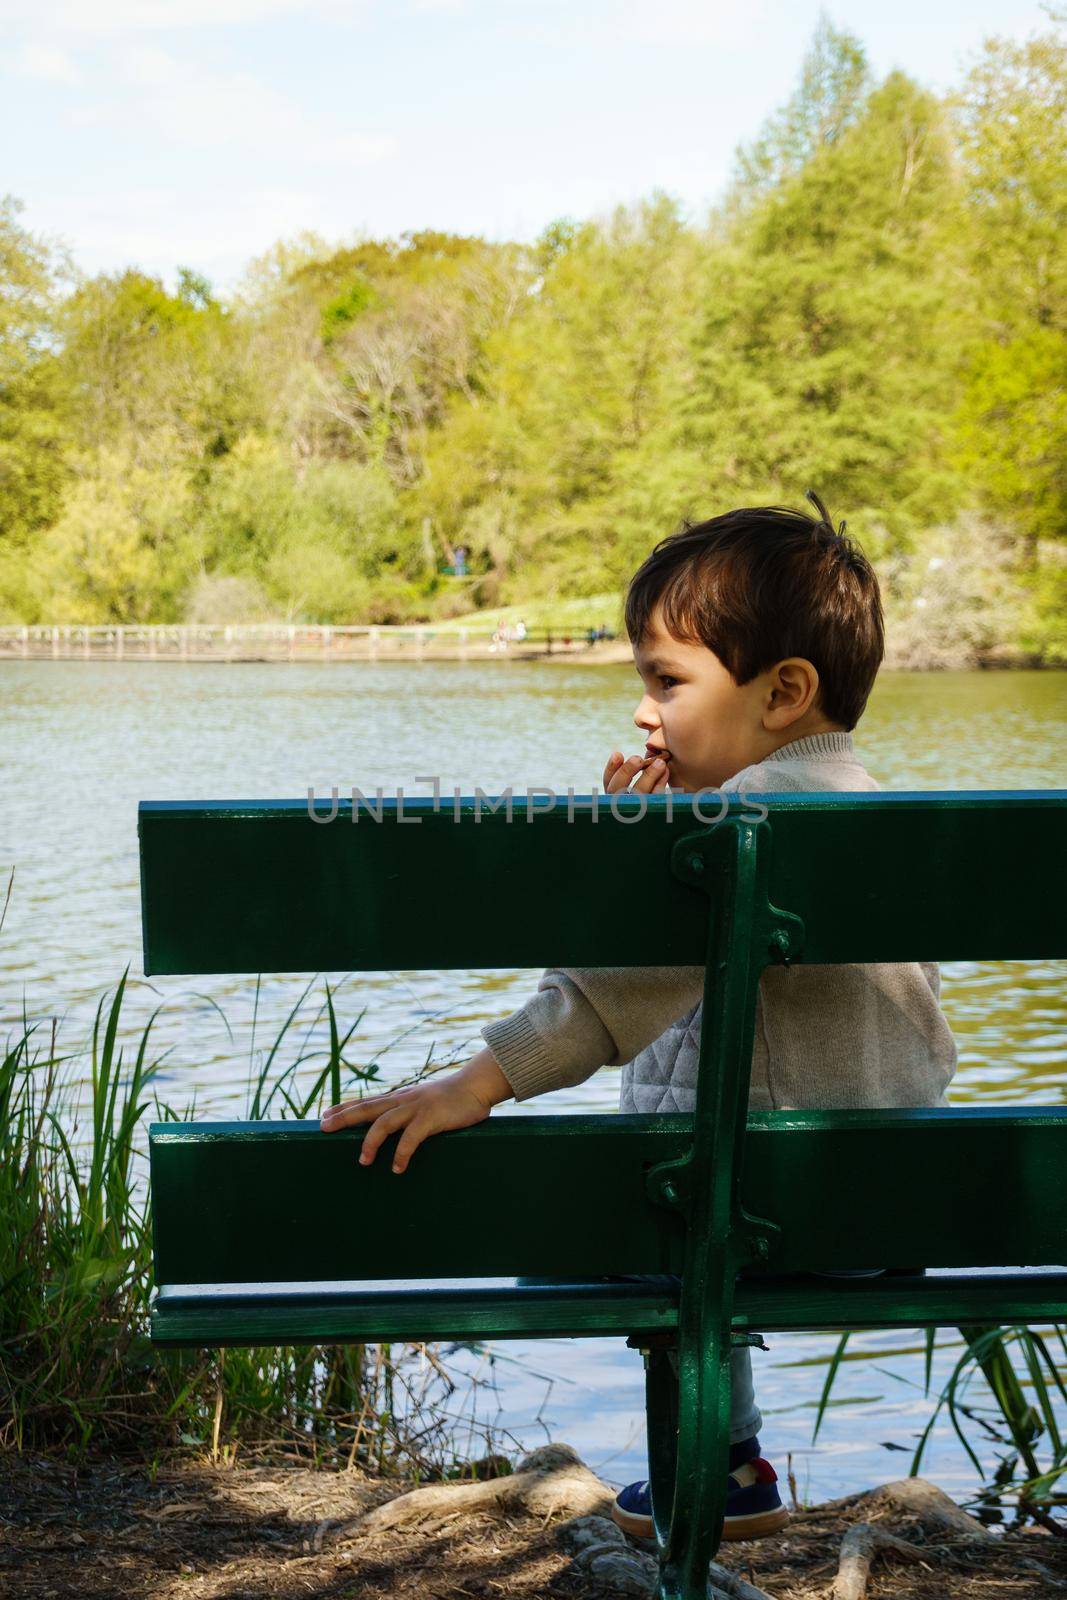 Little boy eating a biscuit on bench on lakeshore by dutourdumonde